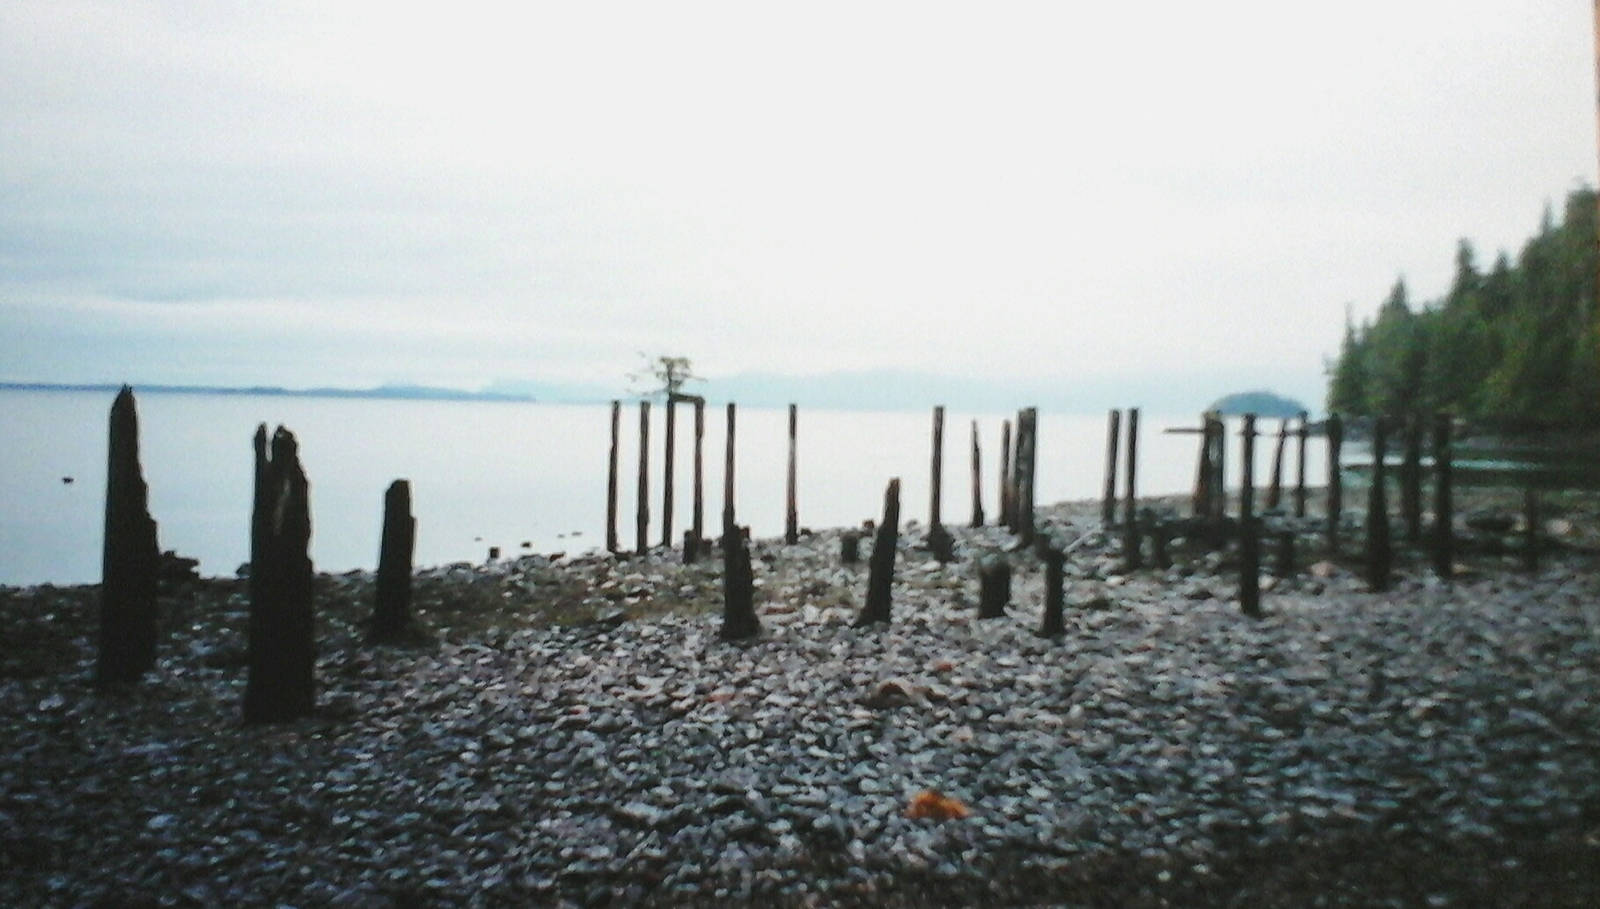 Lonely, burned pilings standing sentinel over the ruinsof the Union Bay cannery, and the beautiful view. Photo by Tara Neilson.